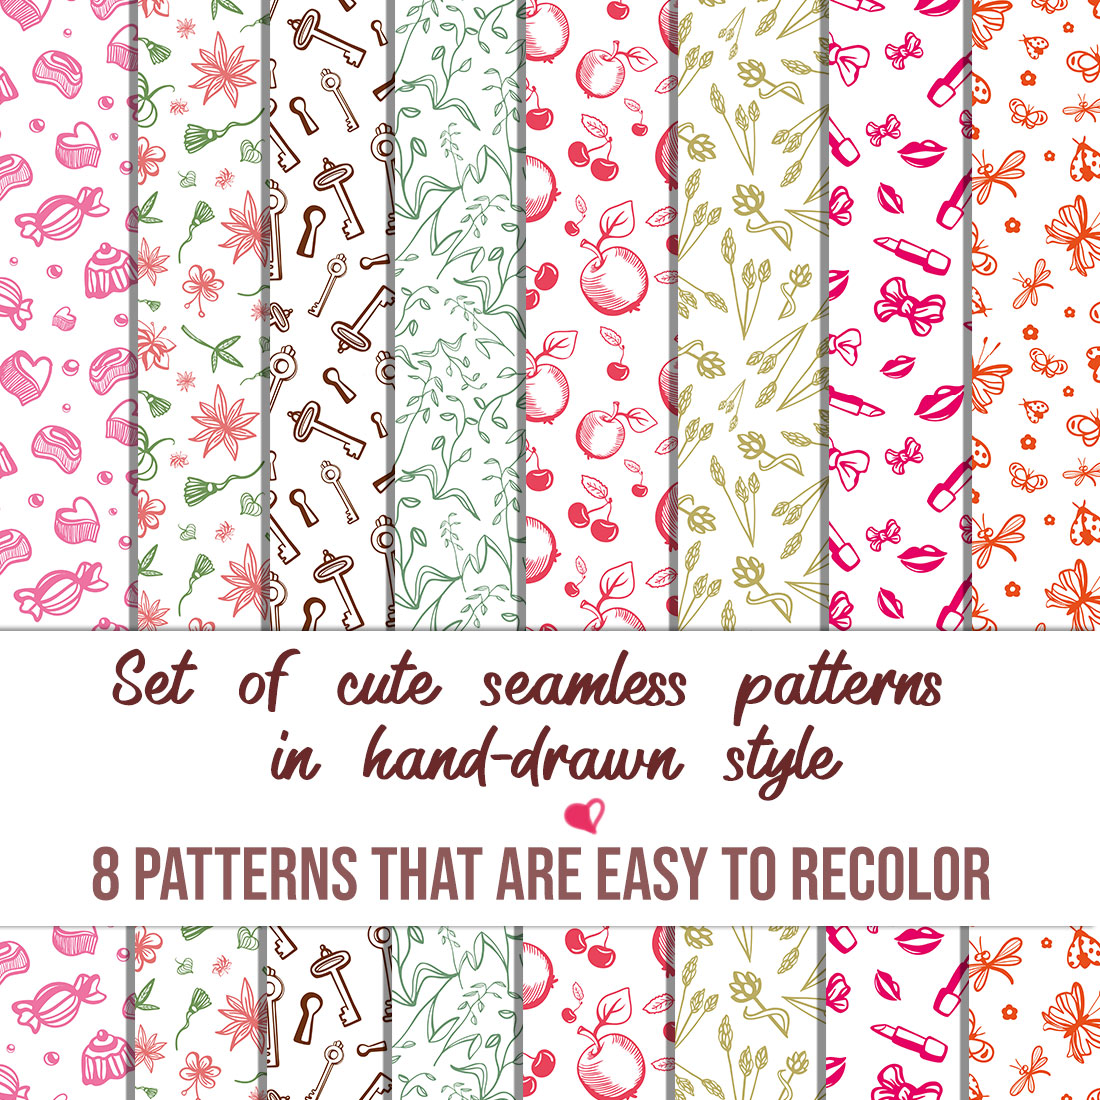 Set of Eight Cute Seamless Patterns cover image.